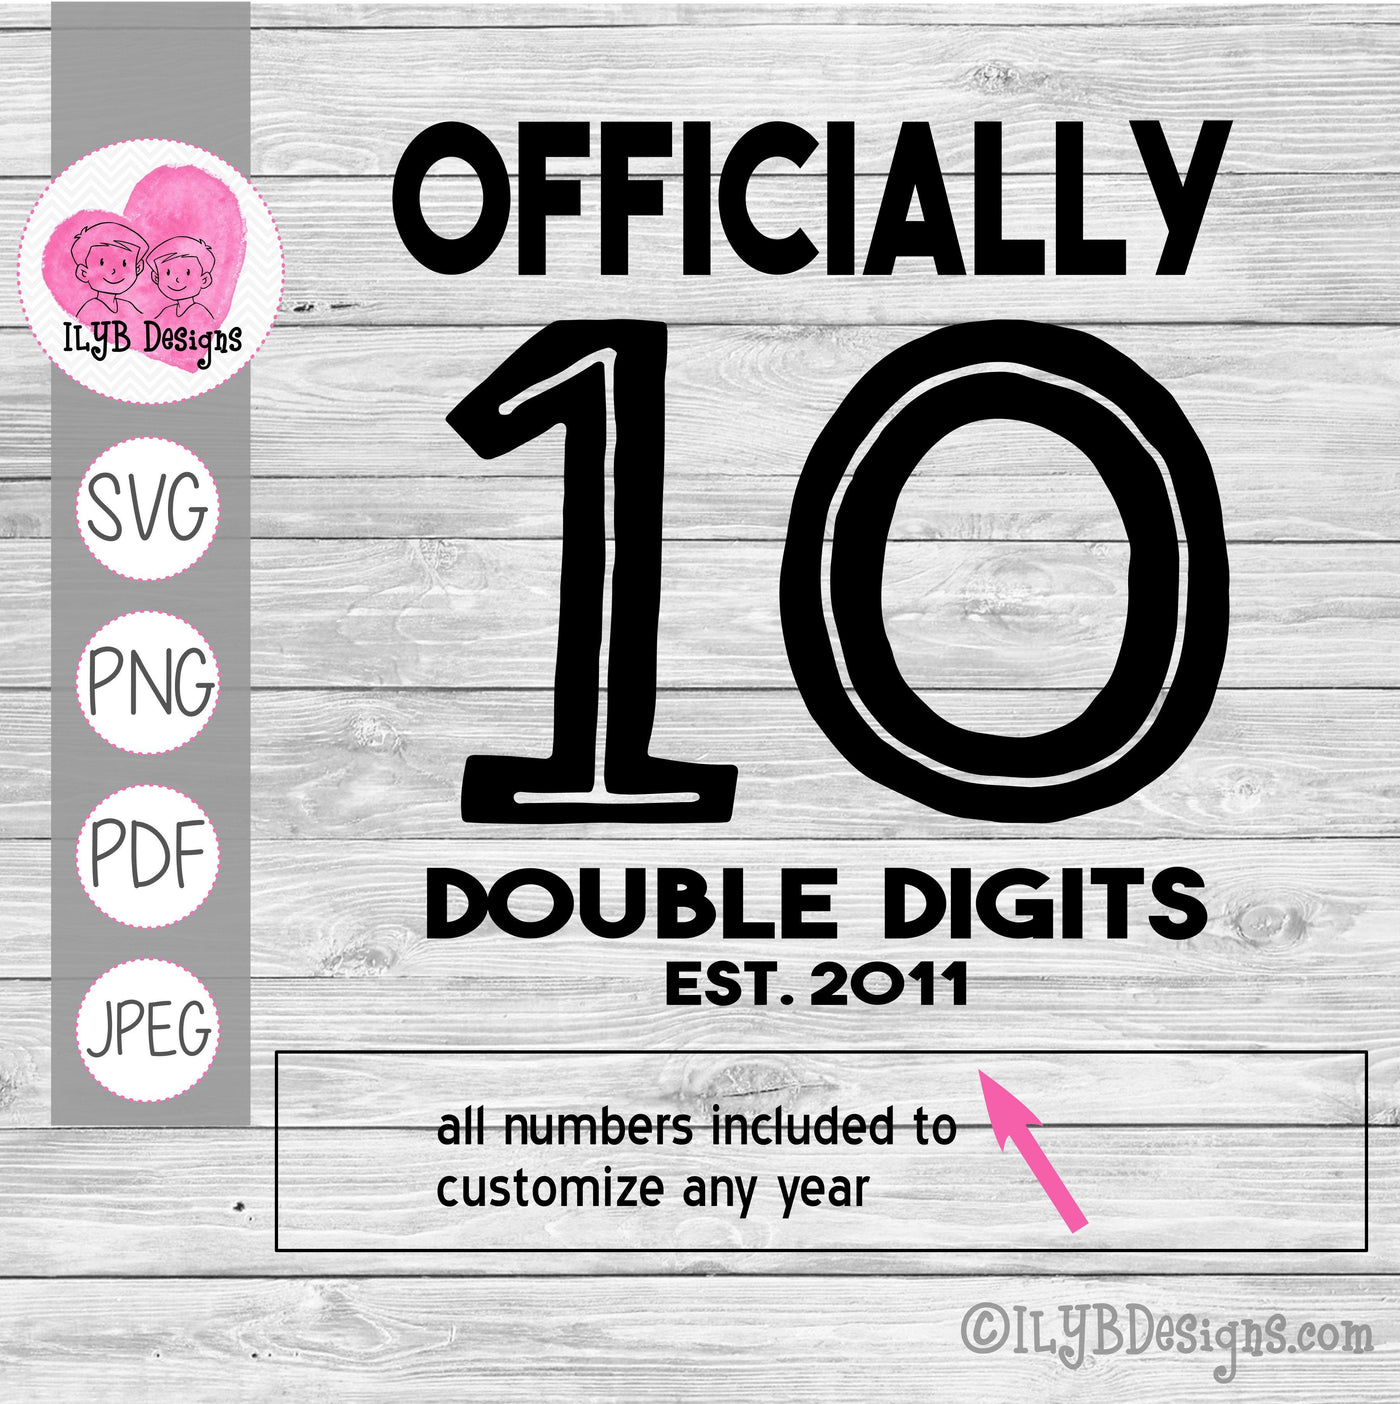 Officially 10 Double Digits SVG, 10th Birthday Cut File - ILYB Designs